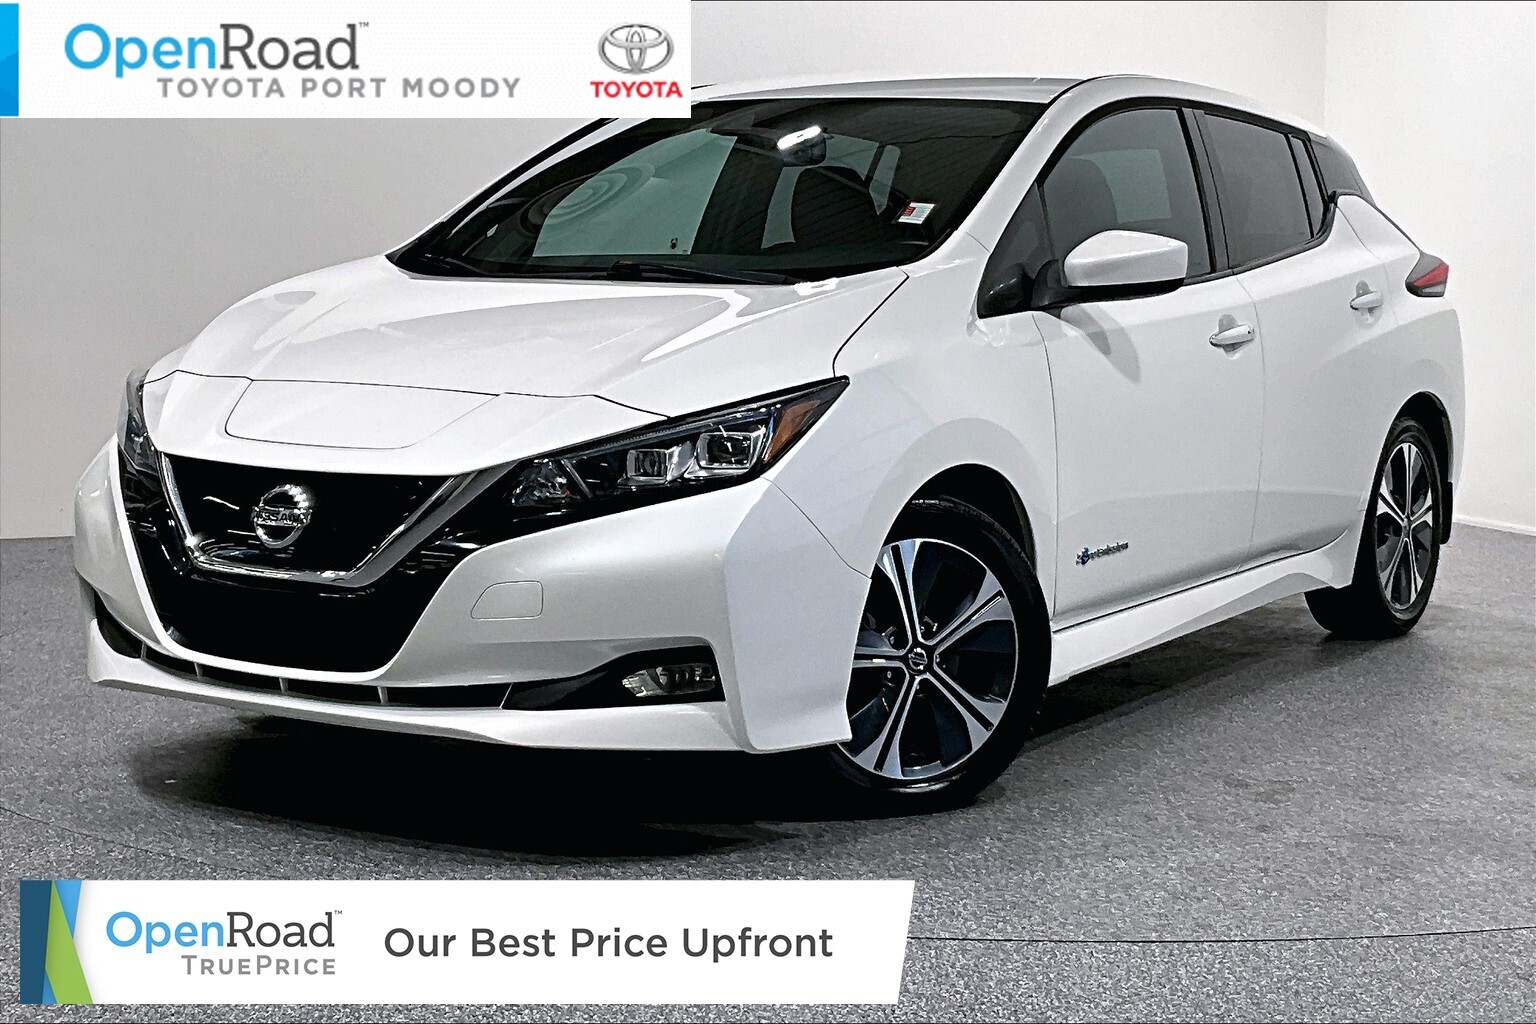 2019 Nissan LEAF SV |OpenRoad True Price |Local |One Owner |No Clai